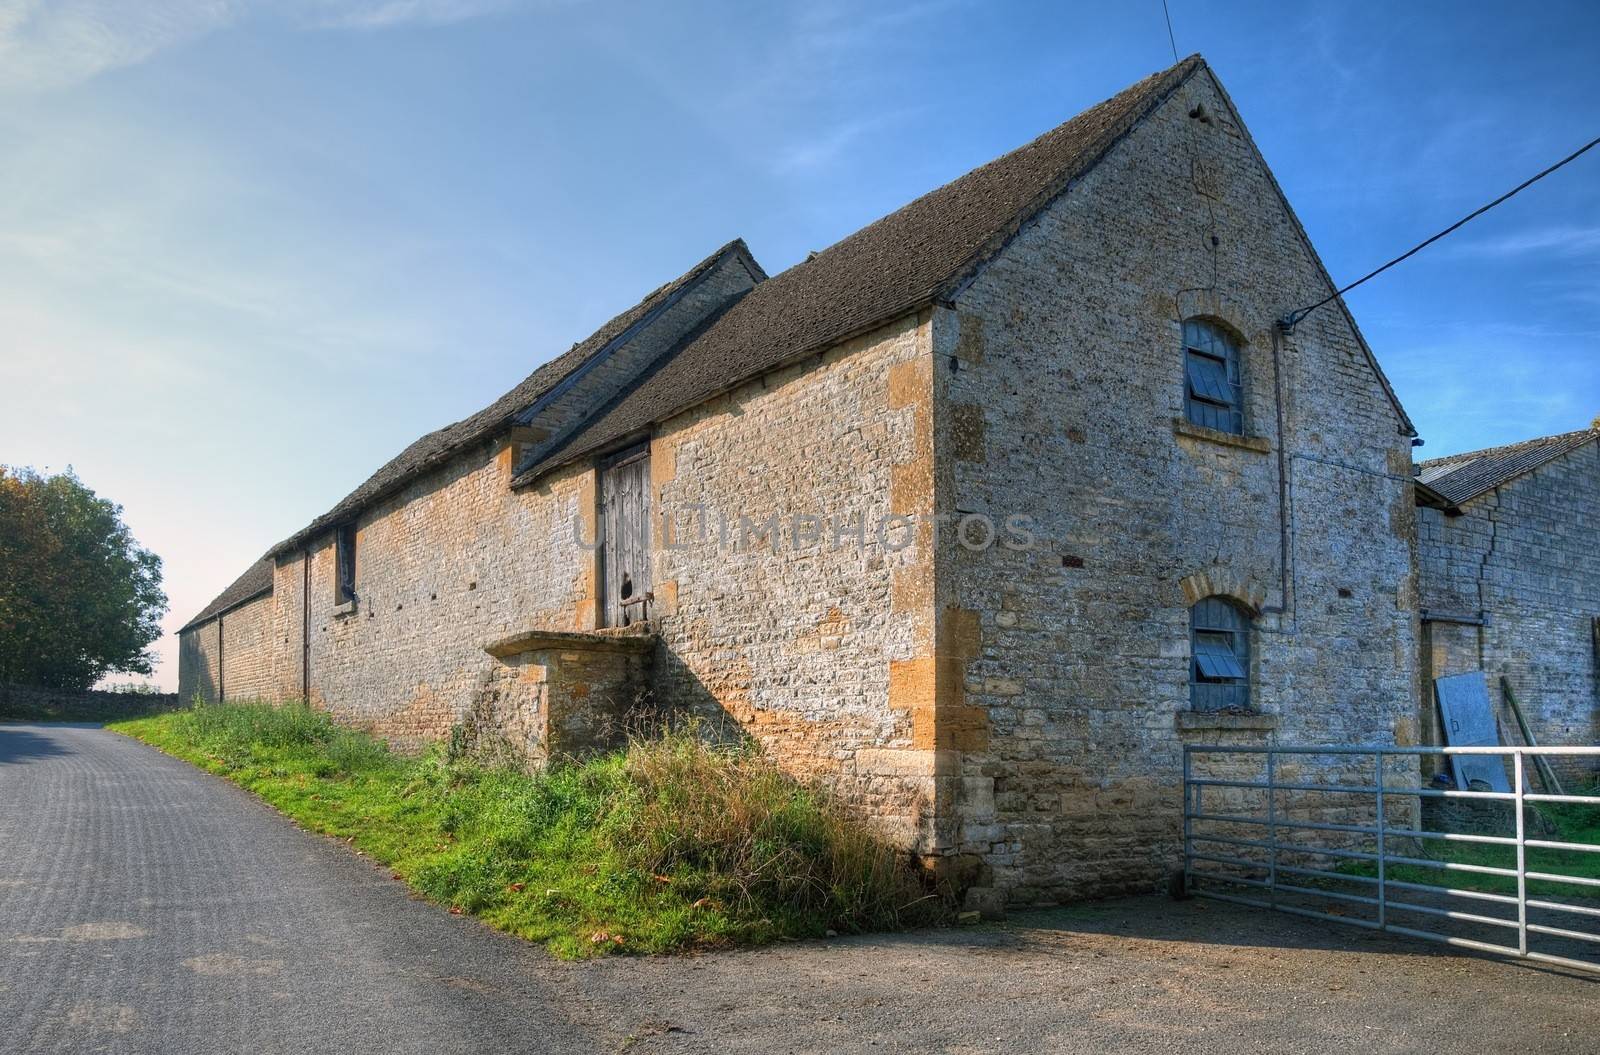 Cotswold barn in the village of Condicote, Gloucestershire, England.